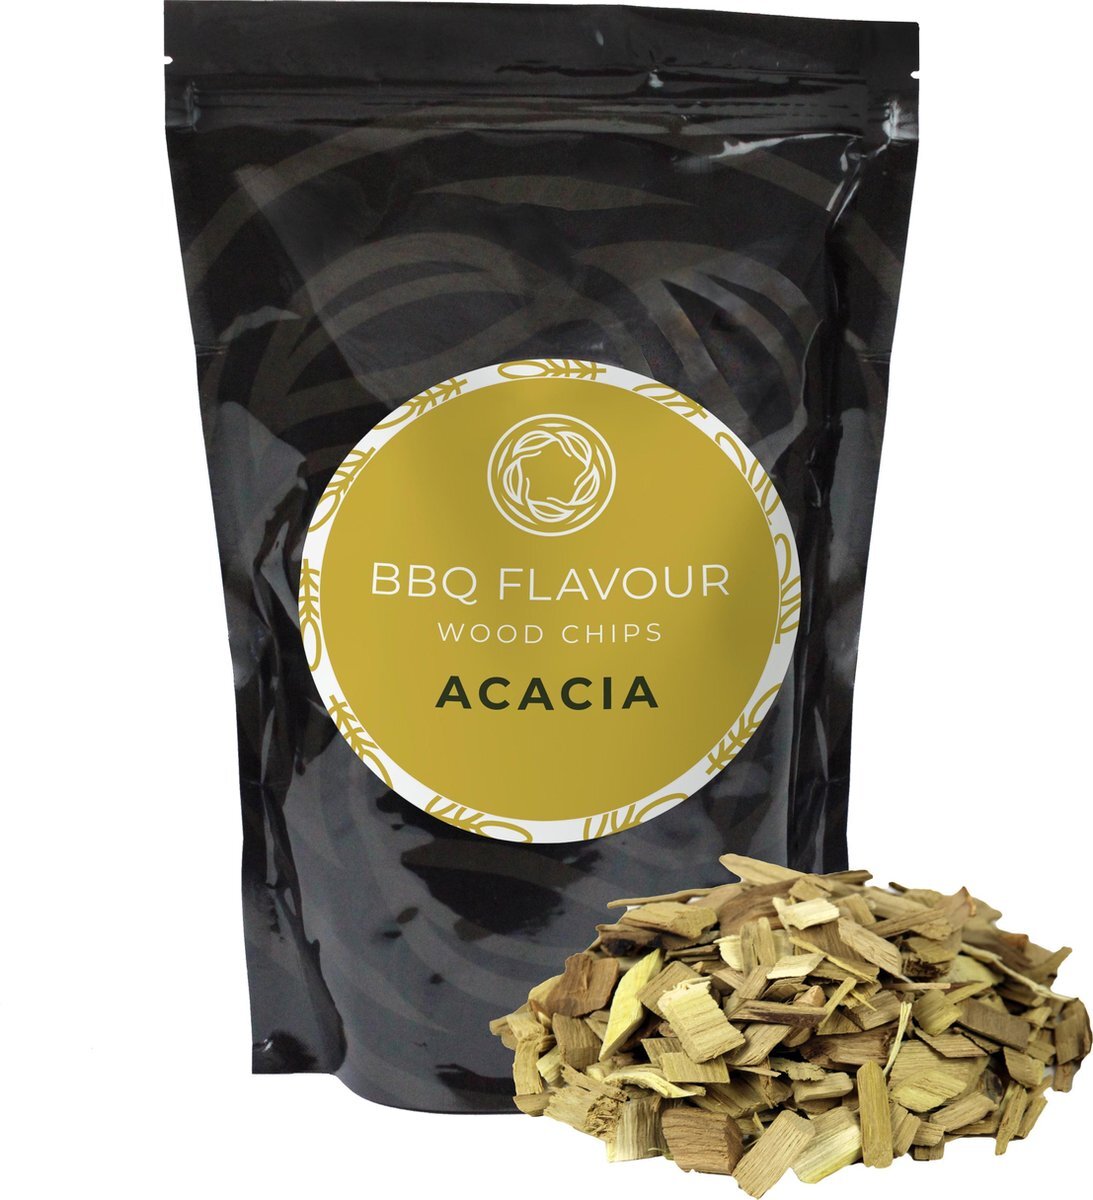 BBQ Flavour rookhout chips acacia